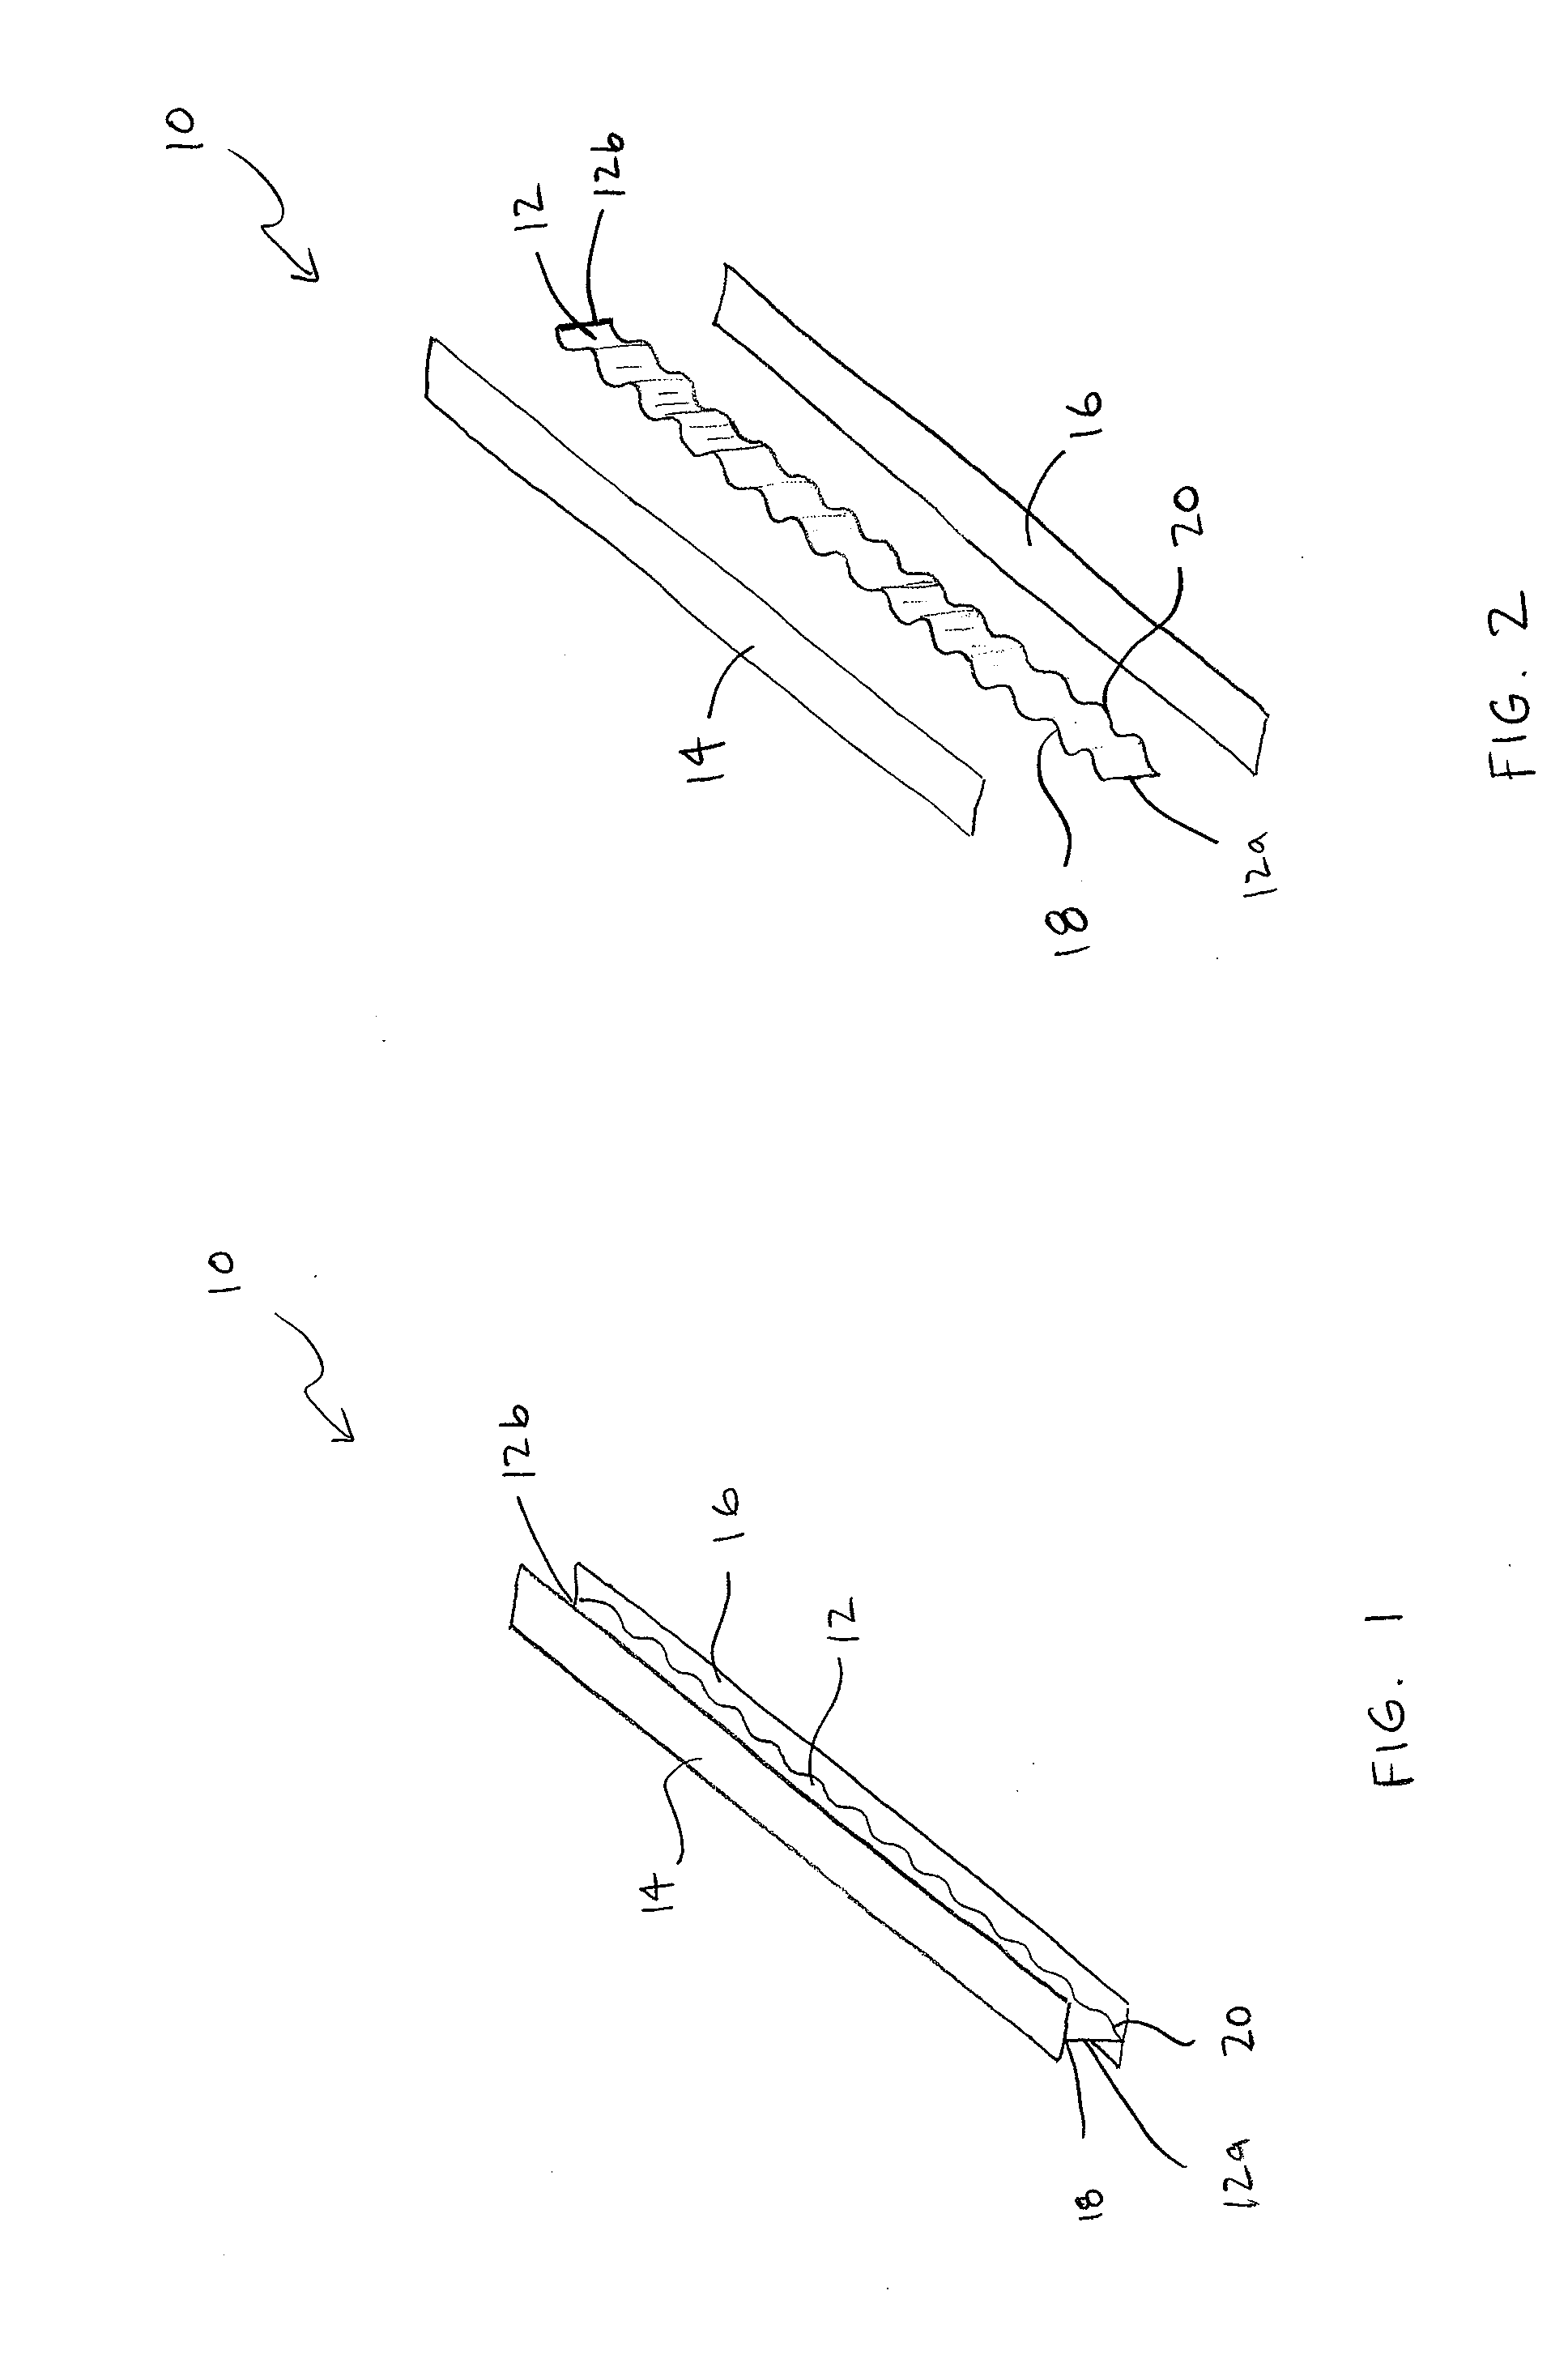 Apparatus and Method for Forming Corrugated Members